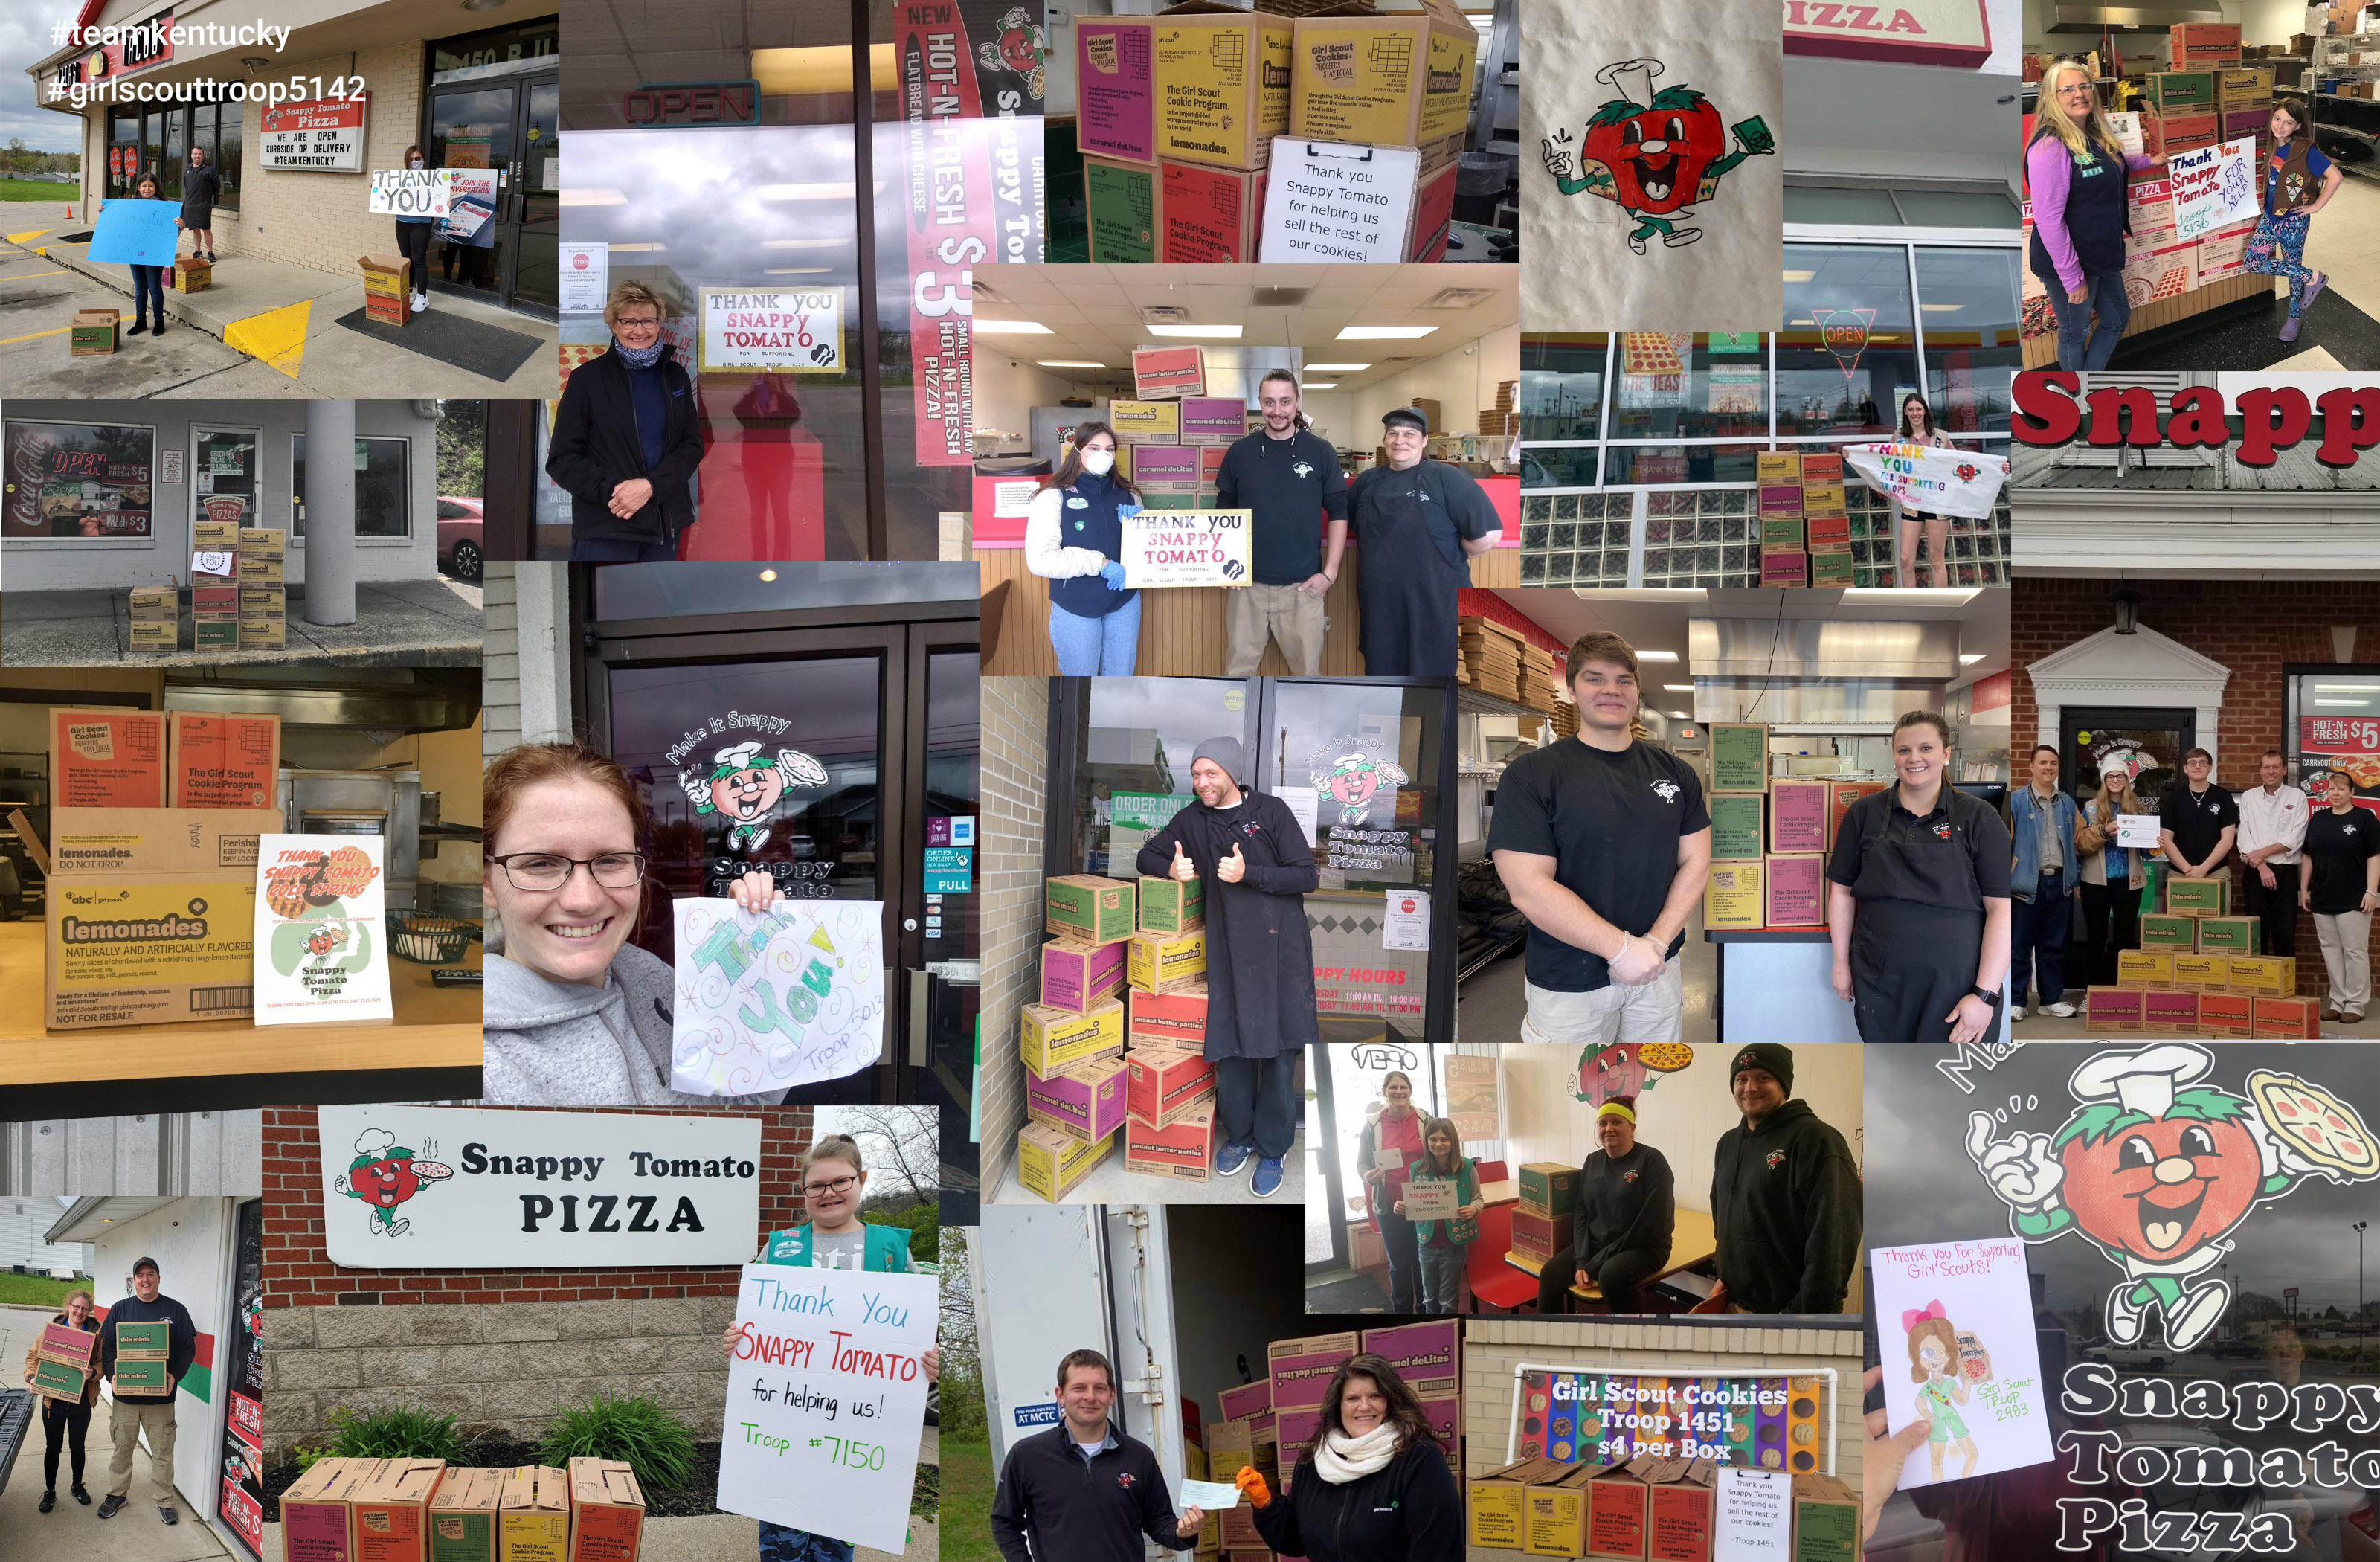 Snappy Tomato Pizza Collage – Images of Girl Scout Cookie Cases Delivered and Celebrated
www.SnappyTomato.com 
#Pizza #SnappyTomato  #SnappyGirlScouts #Family #Dinner #CarryOut #PickUp #Delivery #TakeAway #Franchise #TakeOutTuesday
